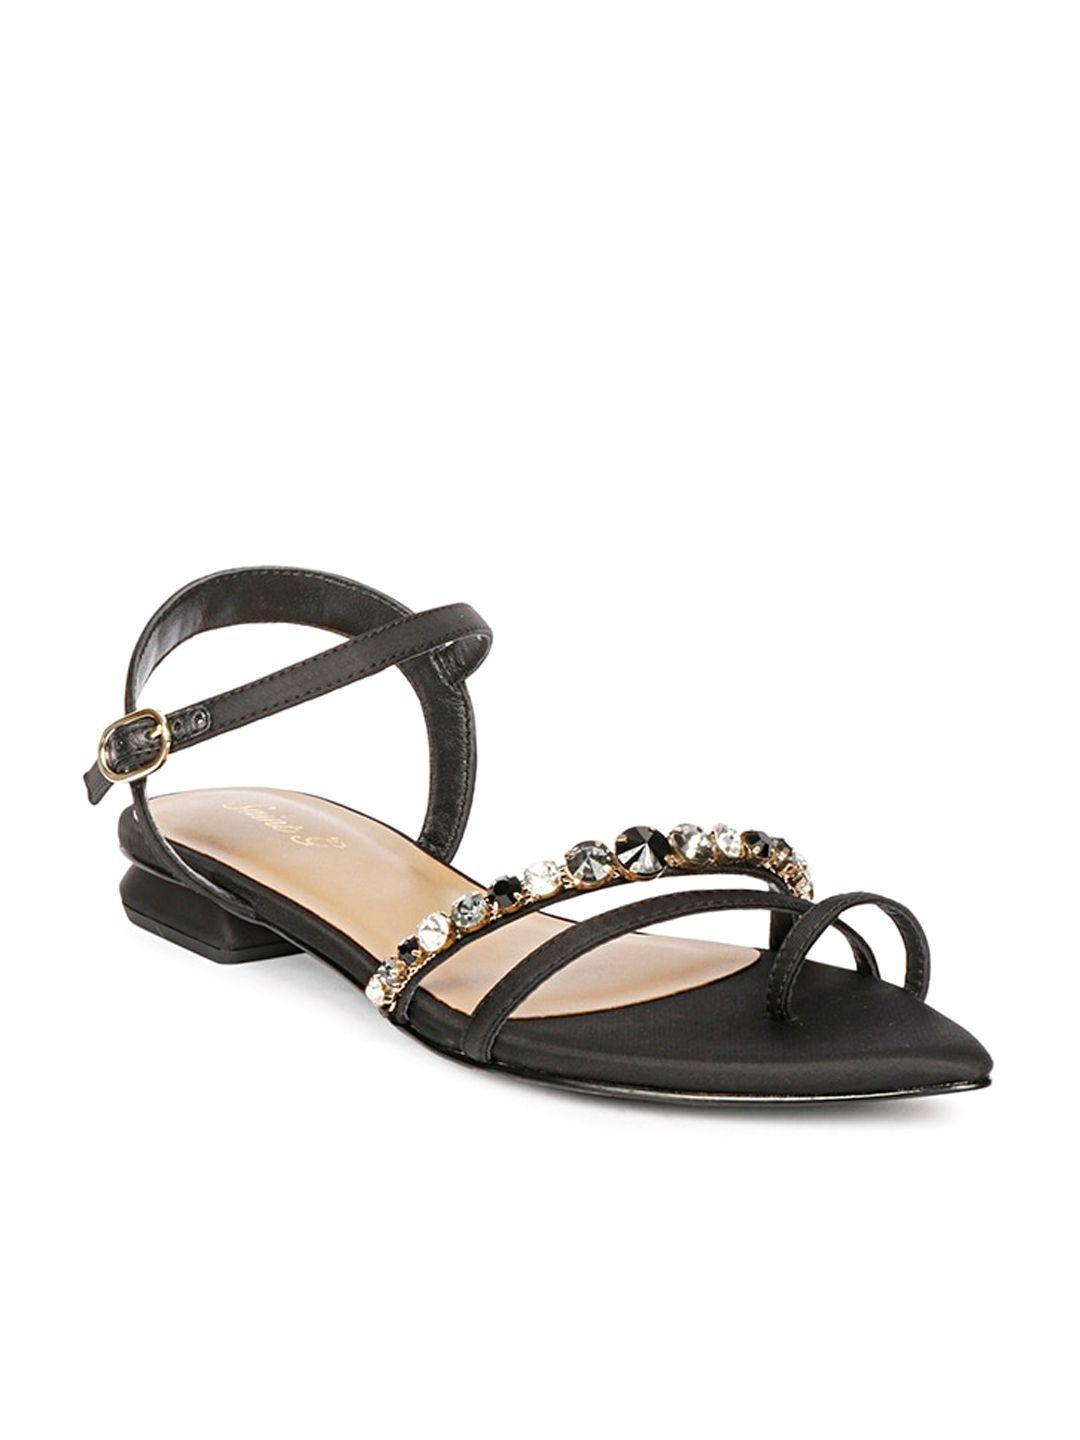 saint g embellished leather open toe flats with buckle closure